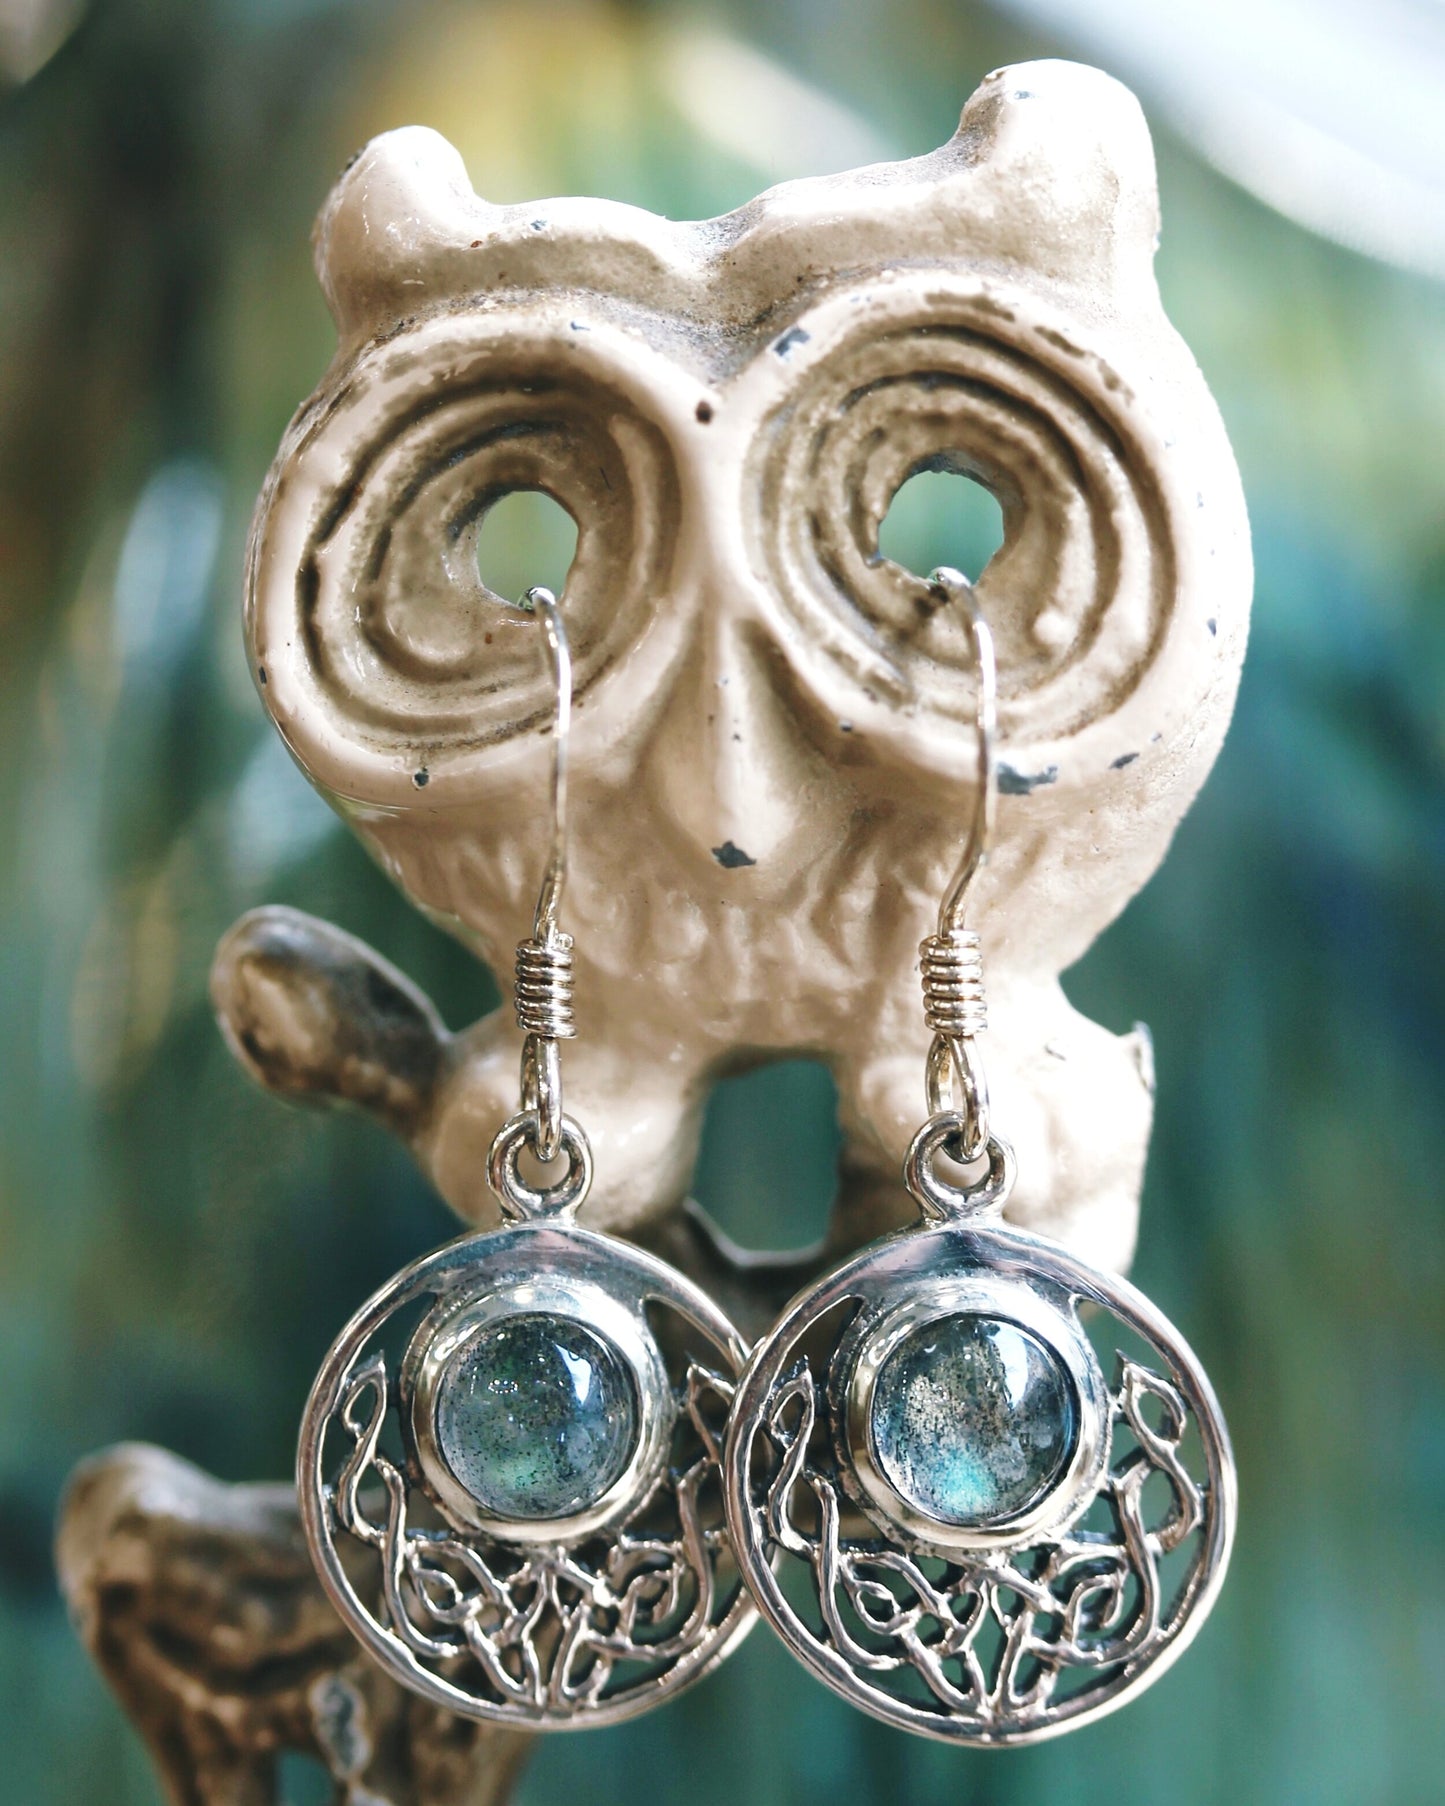 Celtic Knot Earrings - Half Moon filled with Labradorite